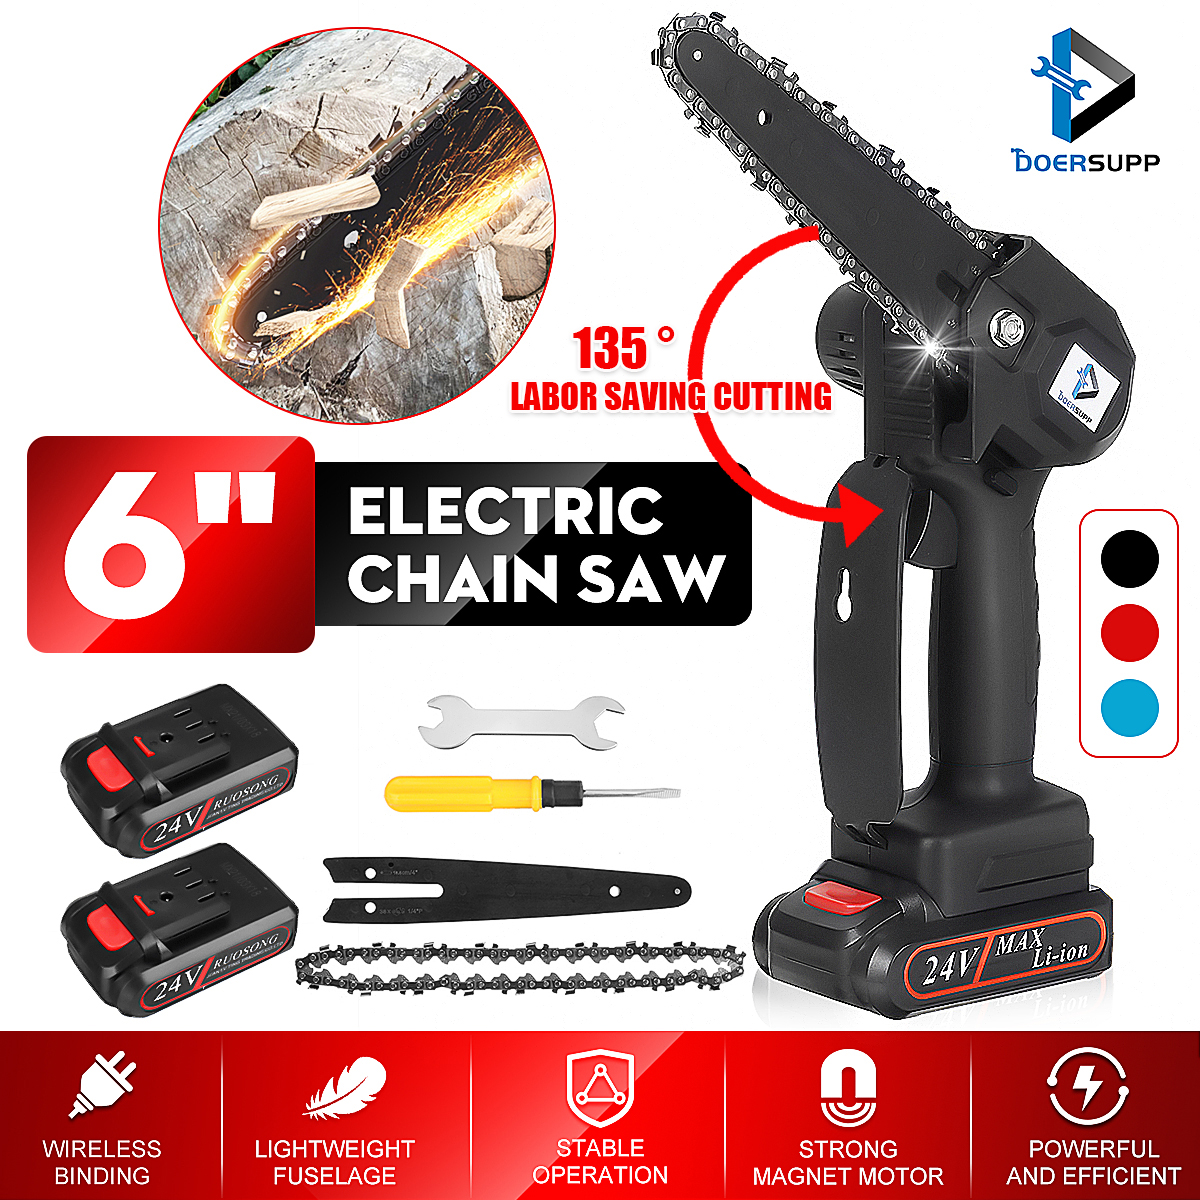 1500W-6Inch-Cordless-Electric-Chain-Saw-Wood-Mini-Cutter-One-Hand-Saw-Woodworking-Tool-W-2pcs-Batter-1833878-1